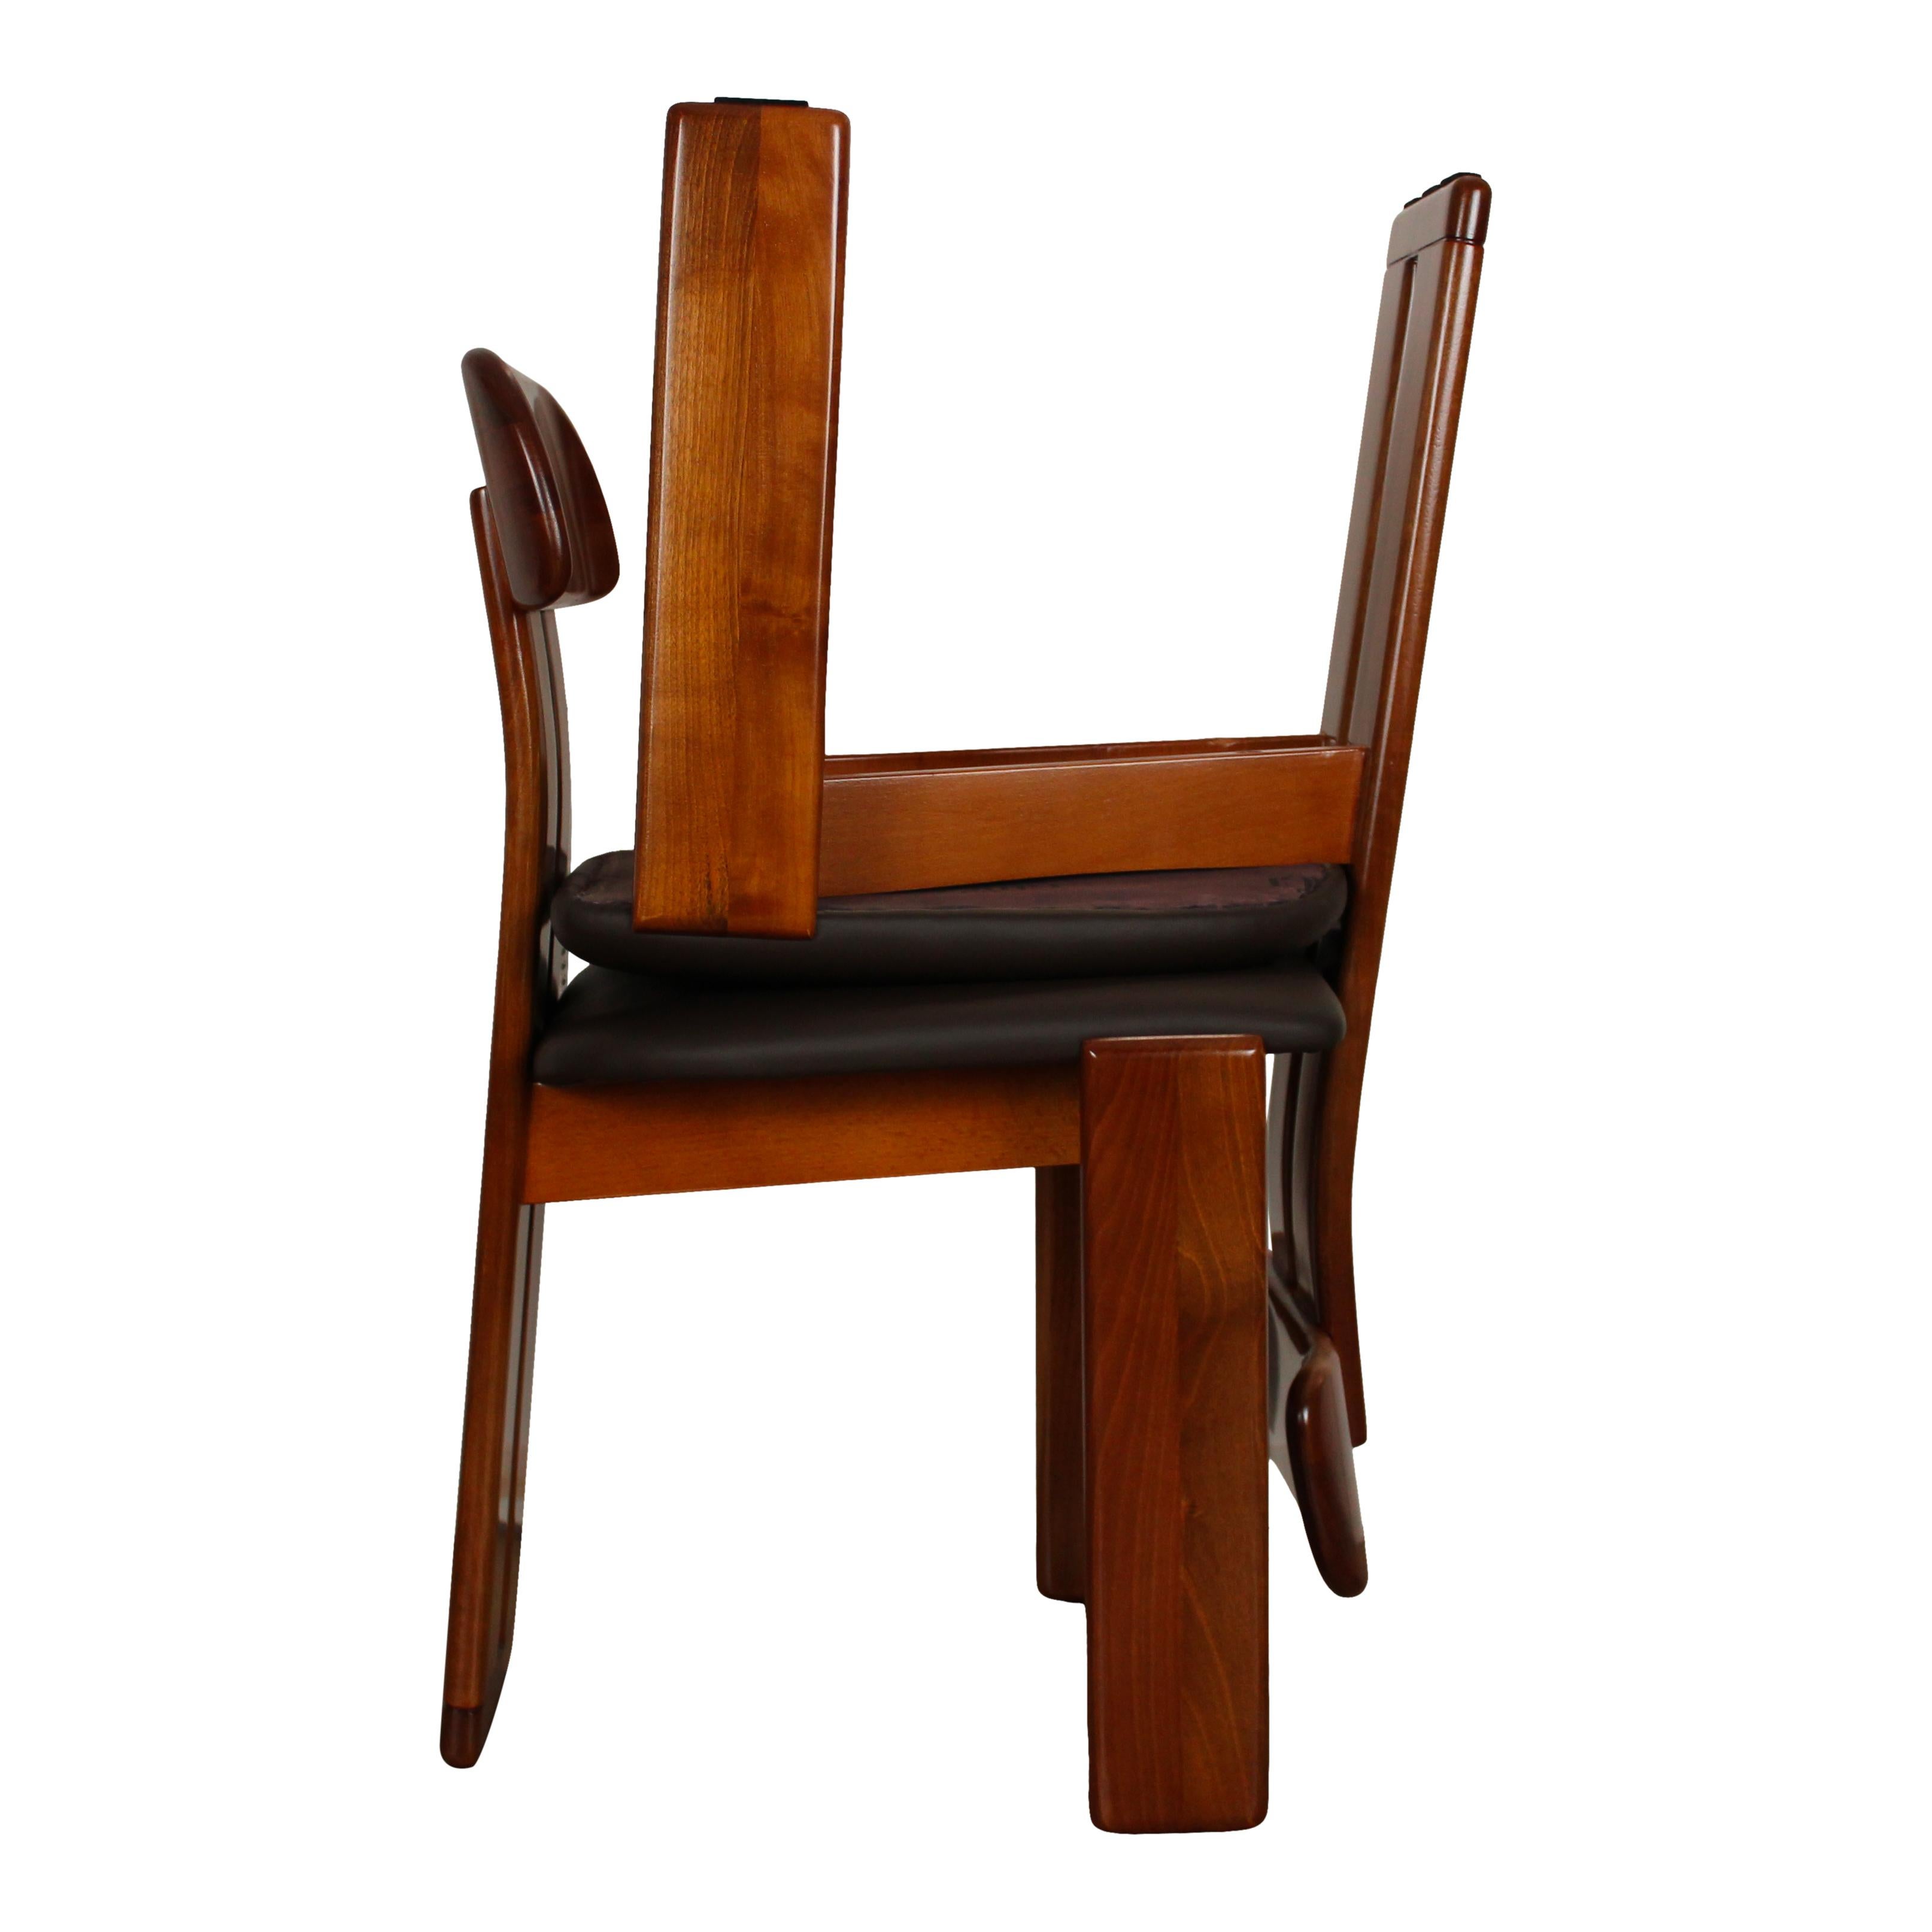 Mario Marenco Walnut Sapporo Dining Chairs for Mobilgirgi, 1970s, Set of 8 For Sale 2